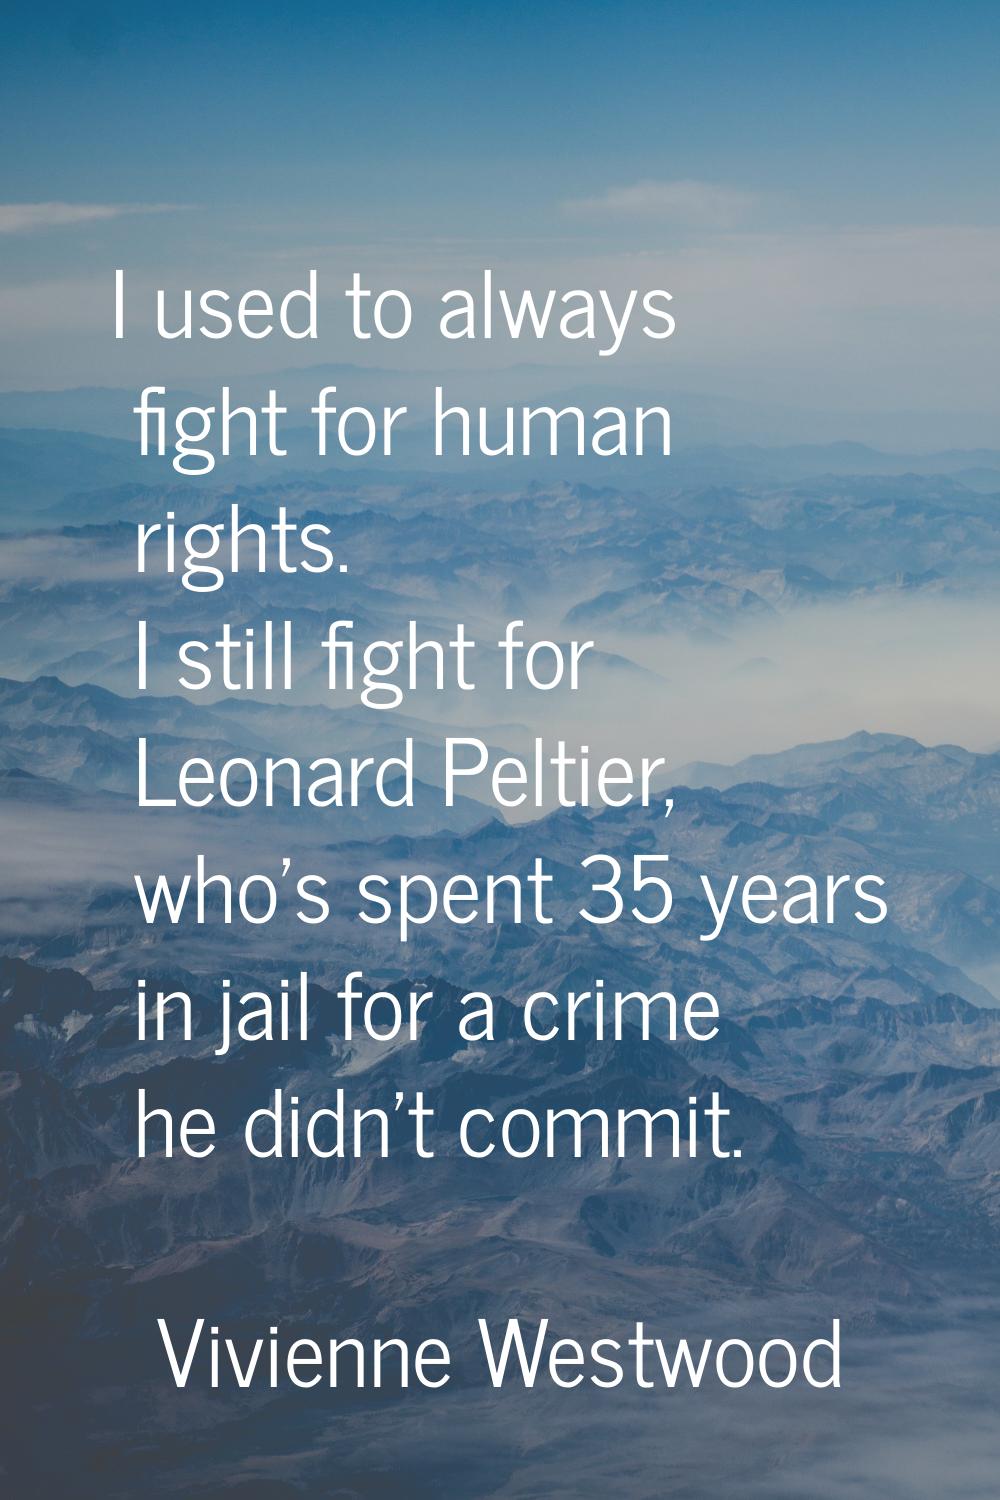 I used to always fight for human rights. I still fight for Leonard Peltier, who's spent 35 years in